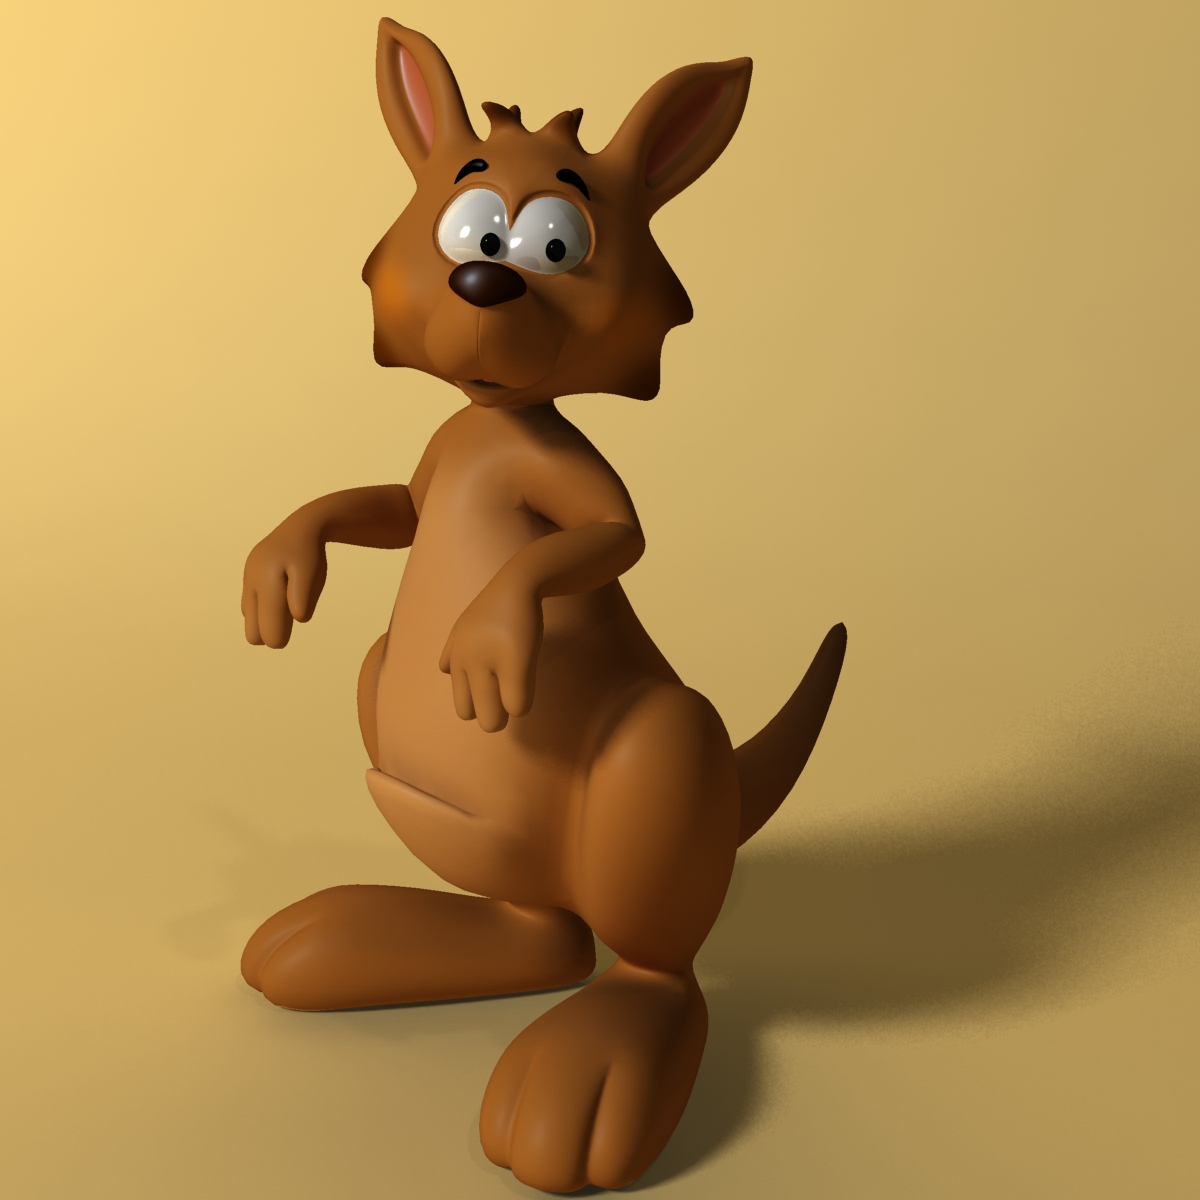 Cartoon kangaroo RIGGED and ANIMATED by supercigale | 3DOcean